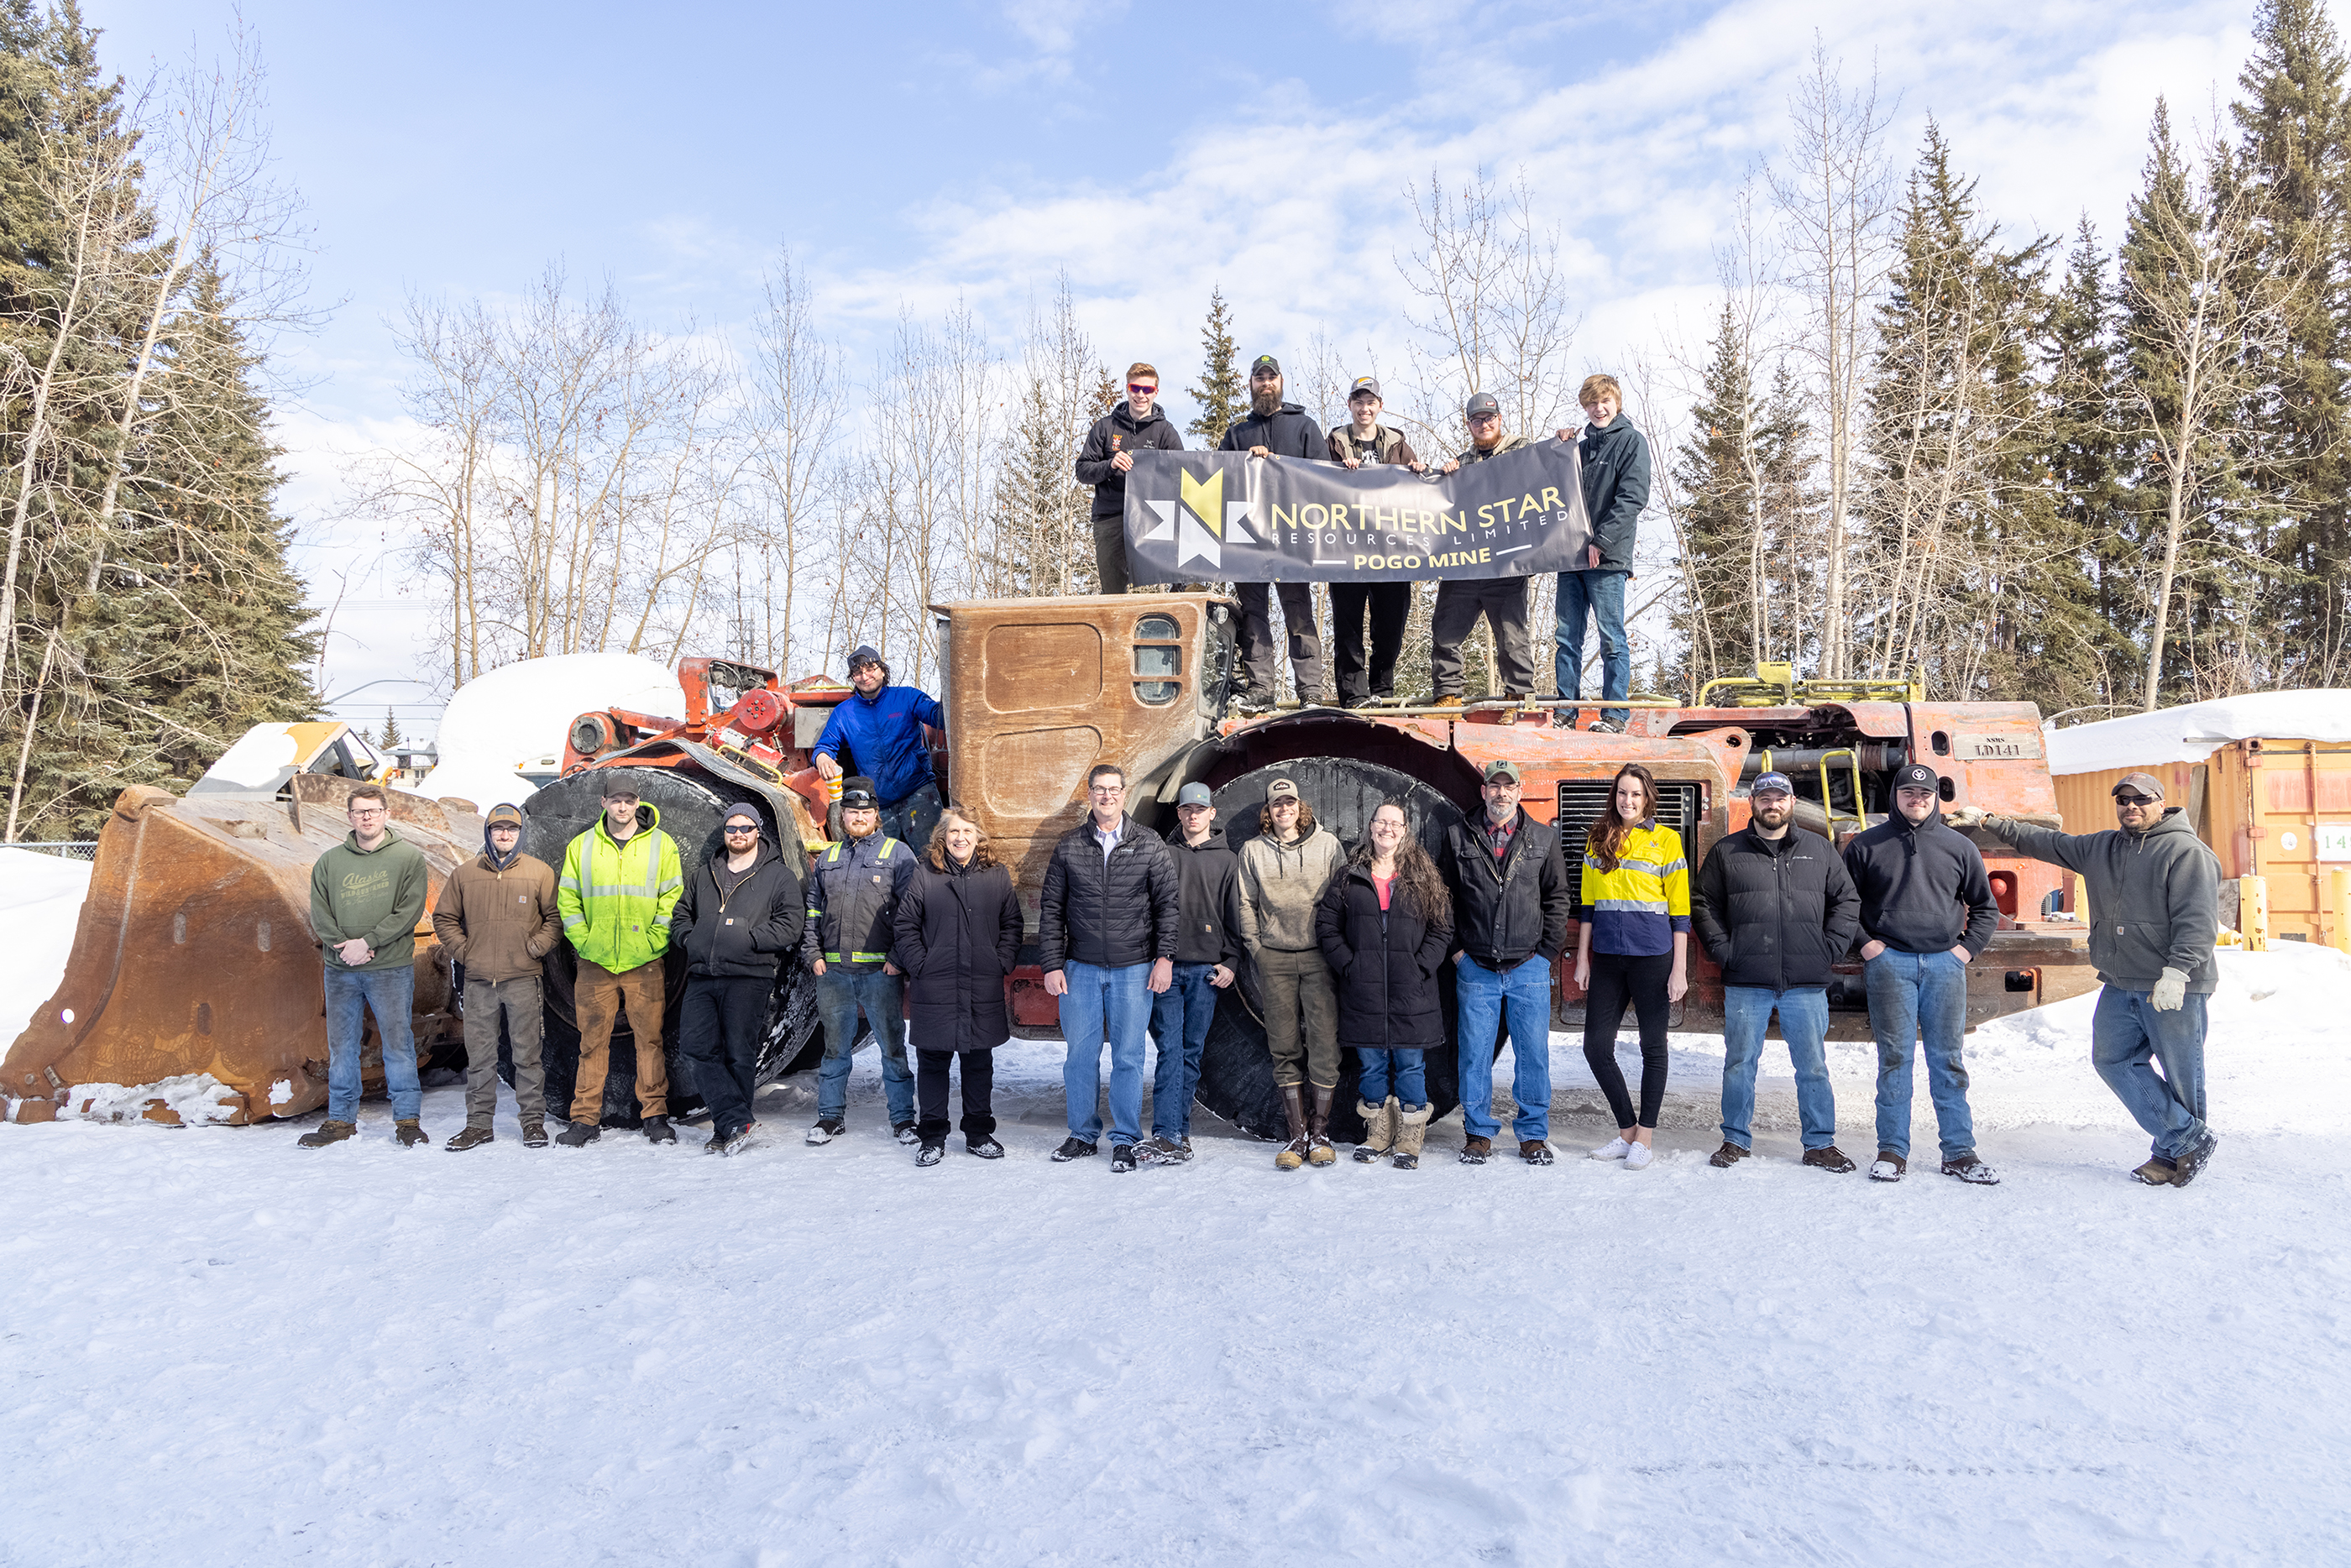 A group of more than a dozen people pose in front of a piece of heavy equipment.